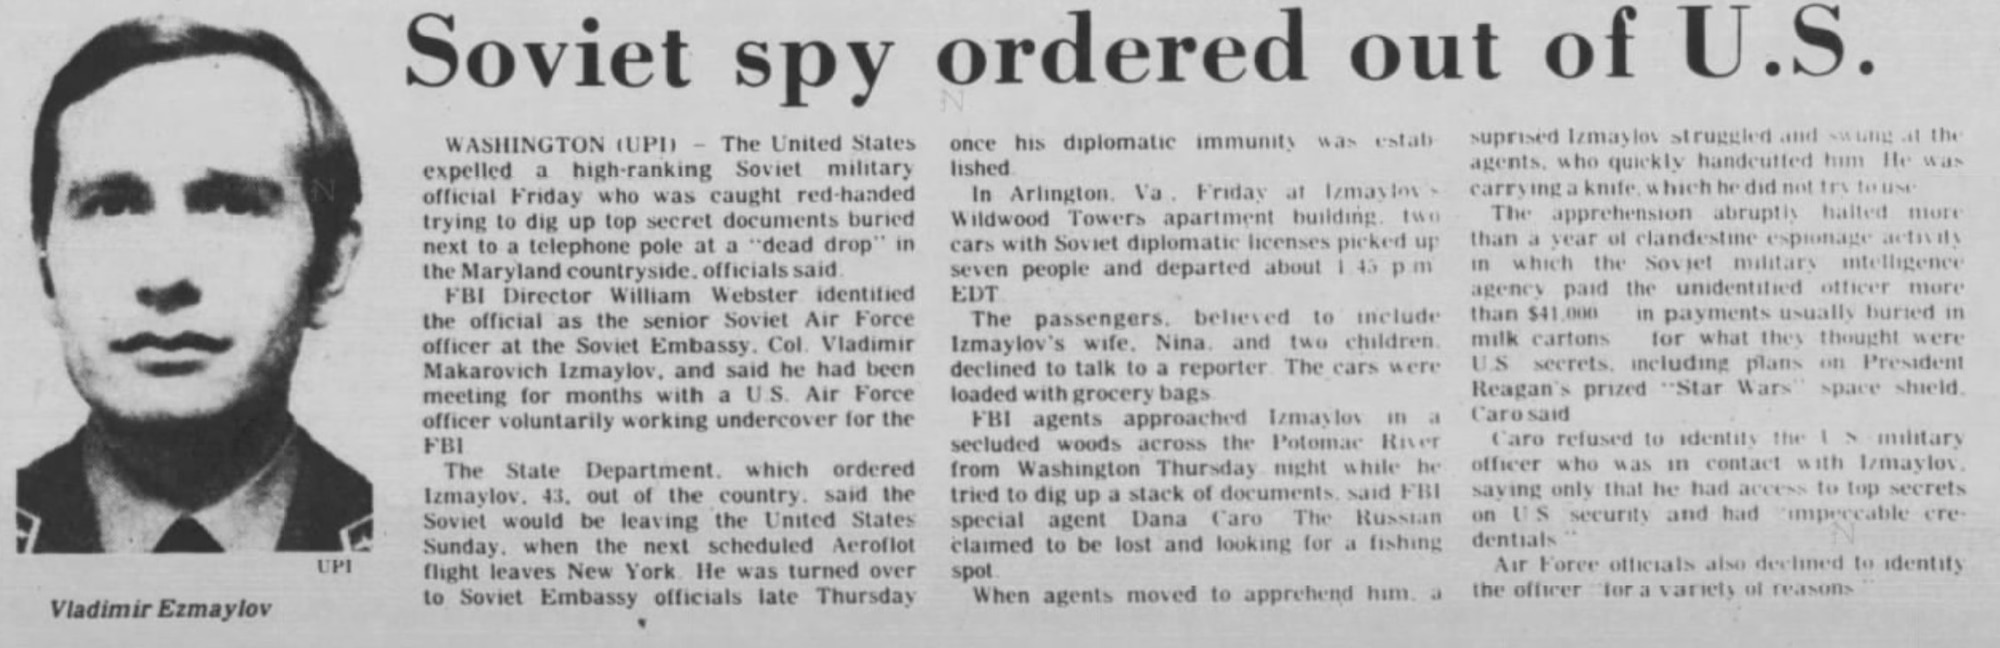 A June 21, 1986, newspaper article depicting Vladimir Izmaylov as the Soviet spy who was ordered to leave the U.S. (The Scranton, Pa. Tribune)